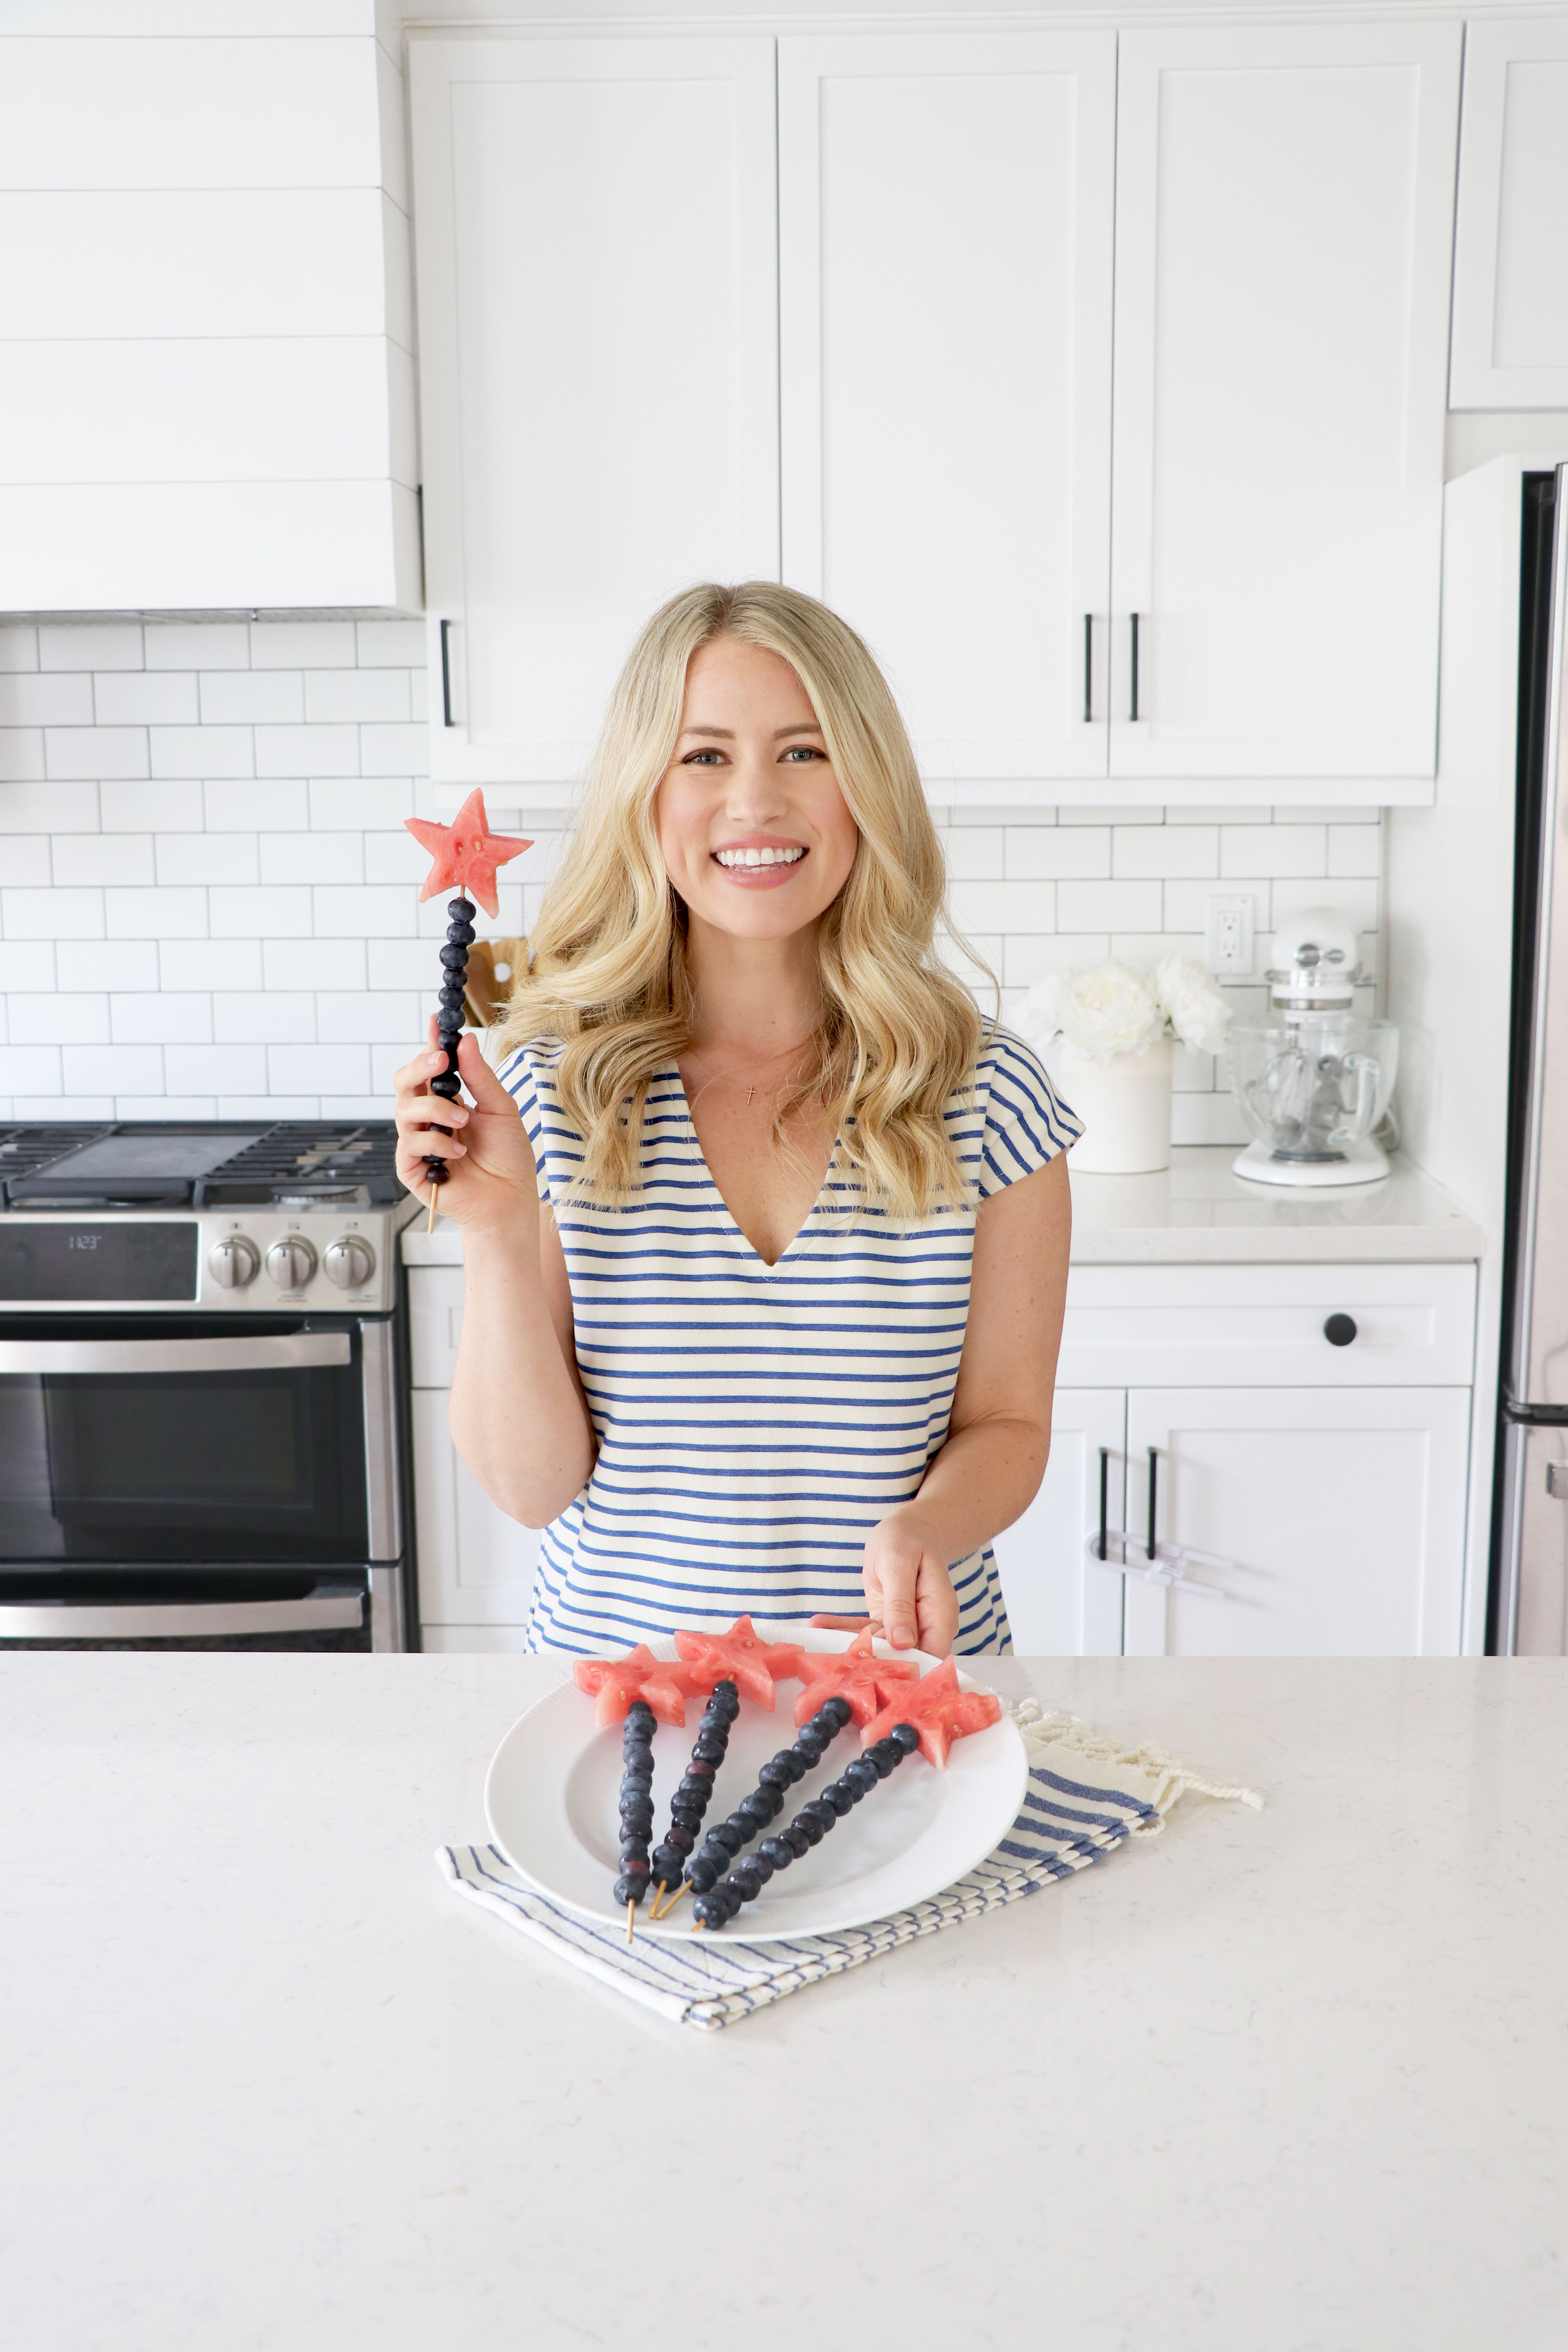 Registered Dietitian in white kitchen holding a wand made of fruit